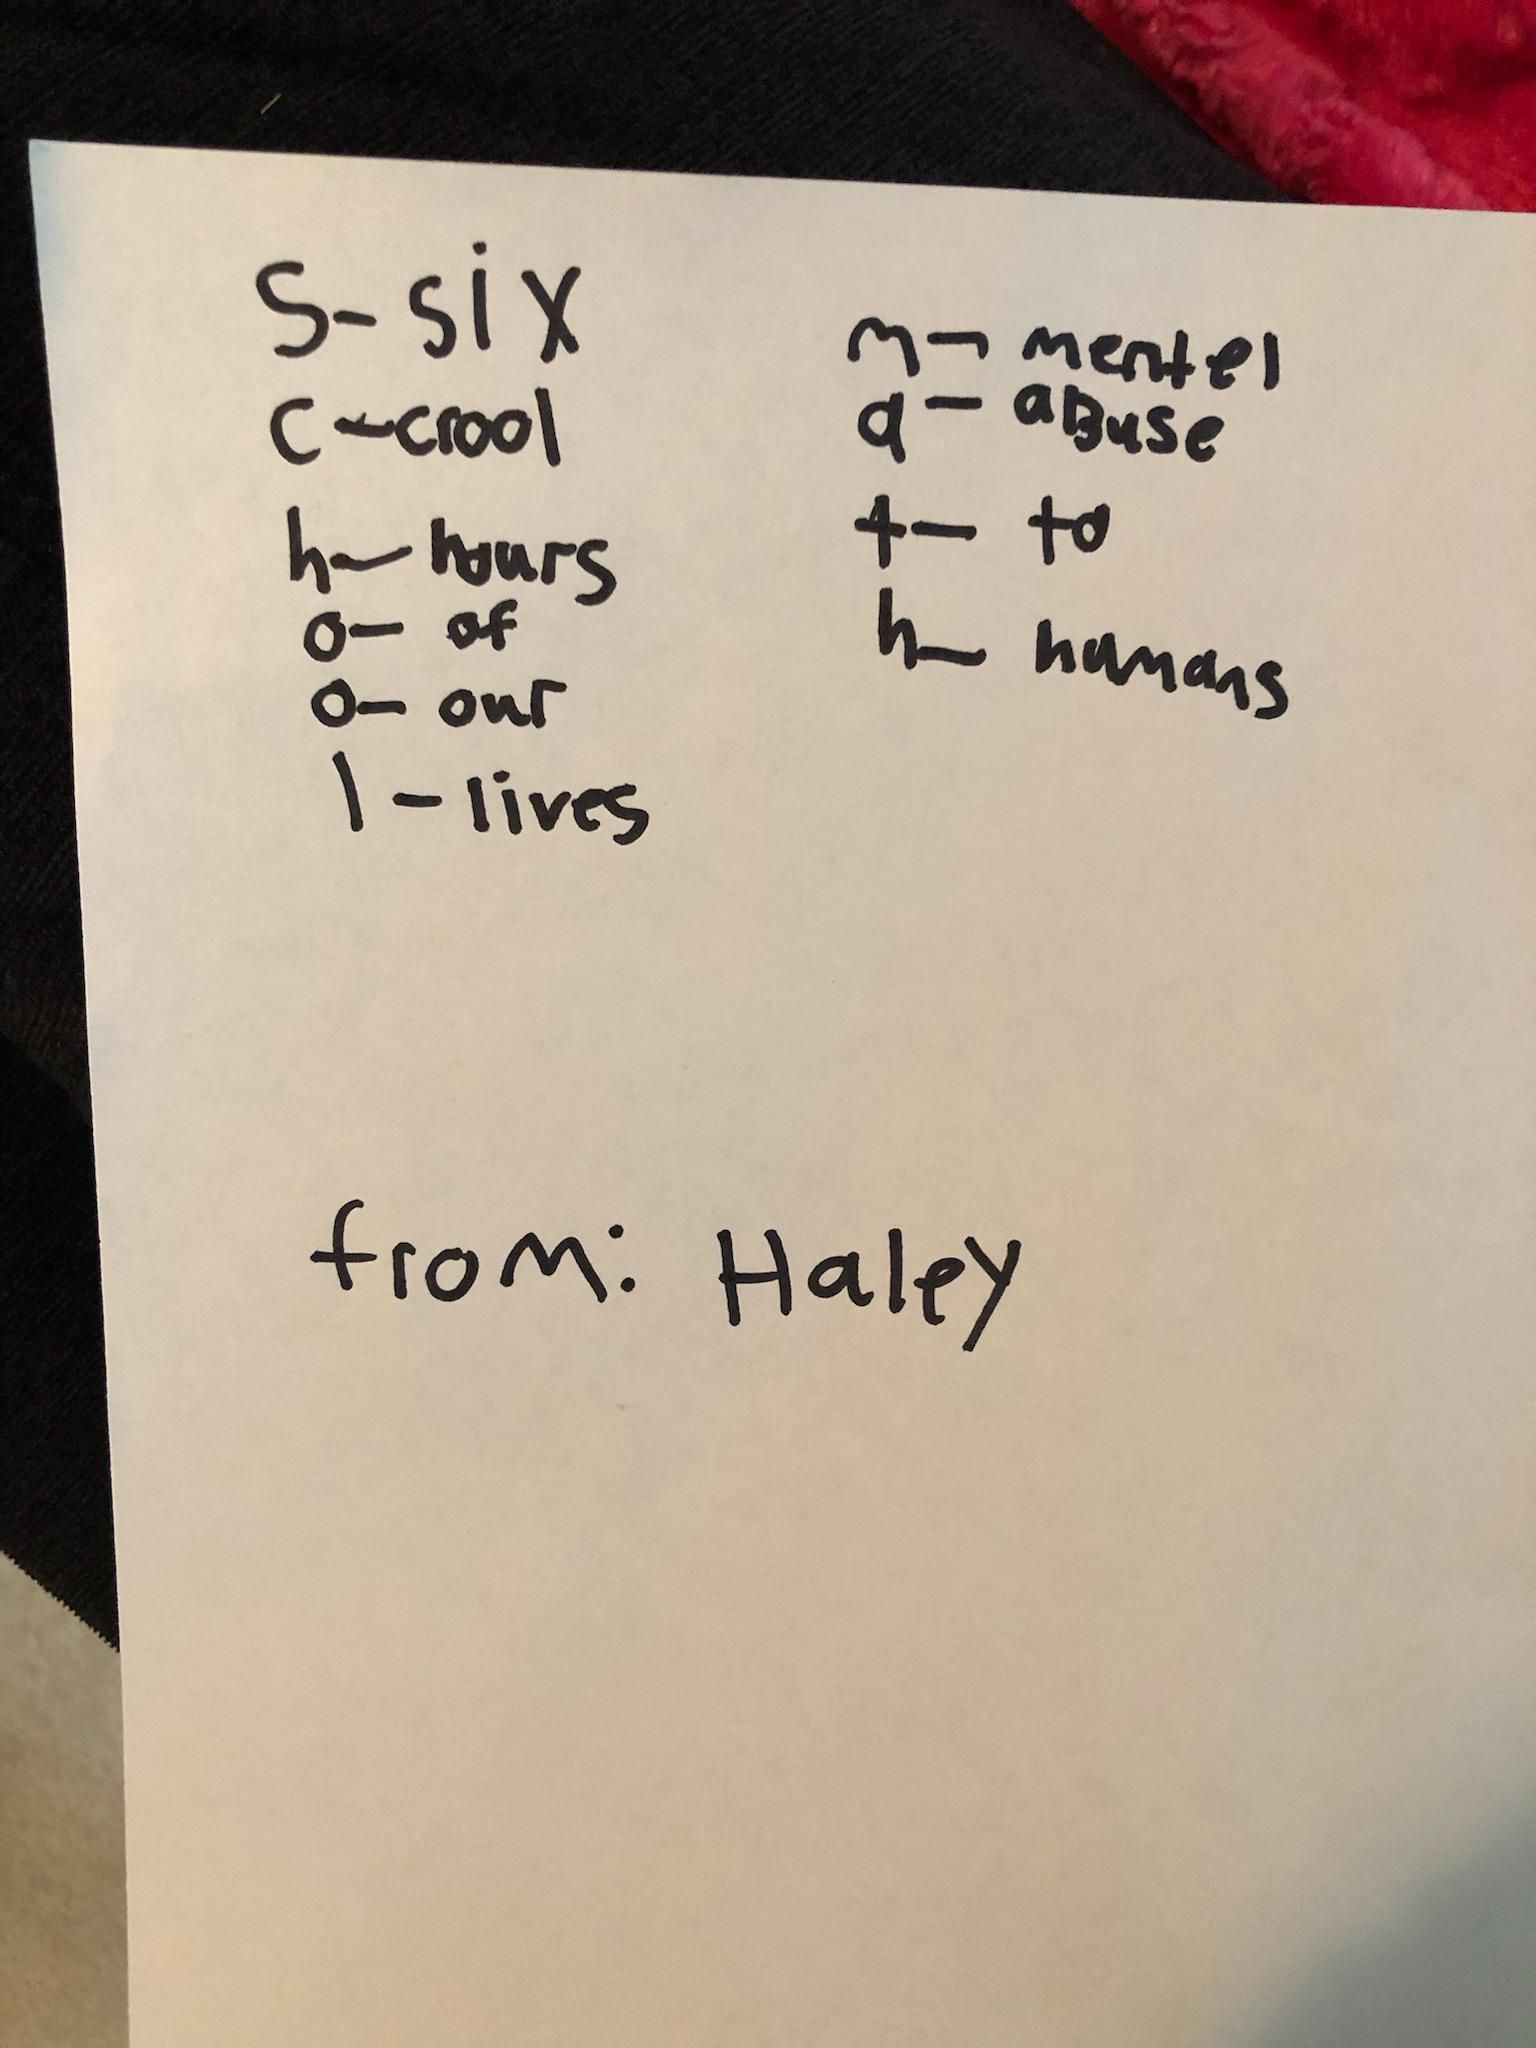 So my 9 yr old daughter had to write a word for each letter of "school math" and this is what she came up with.